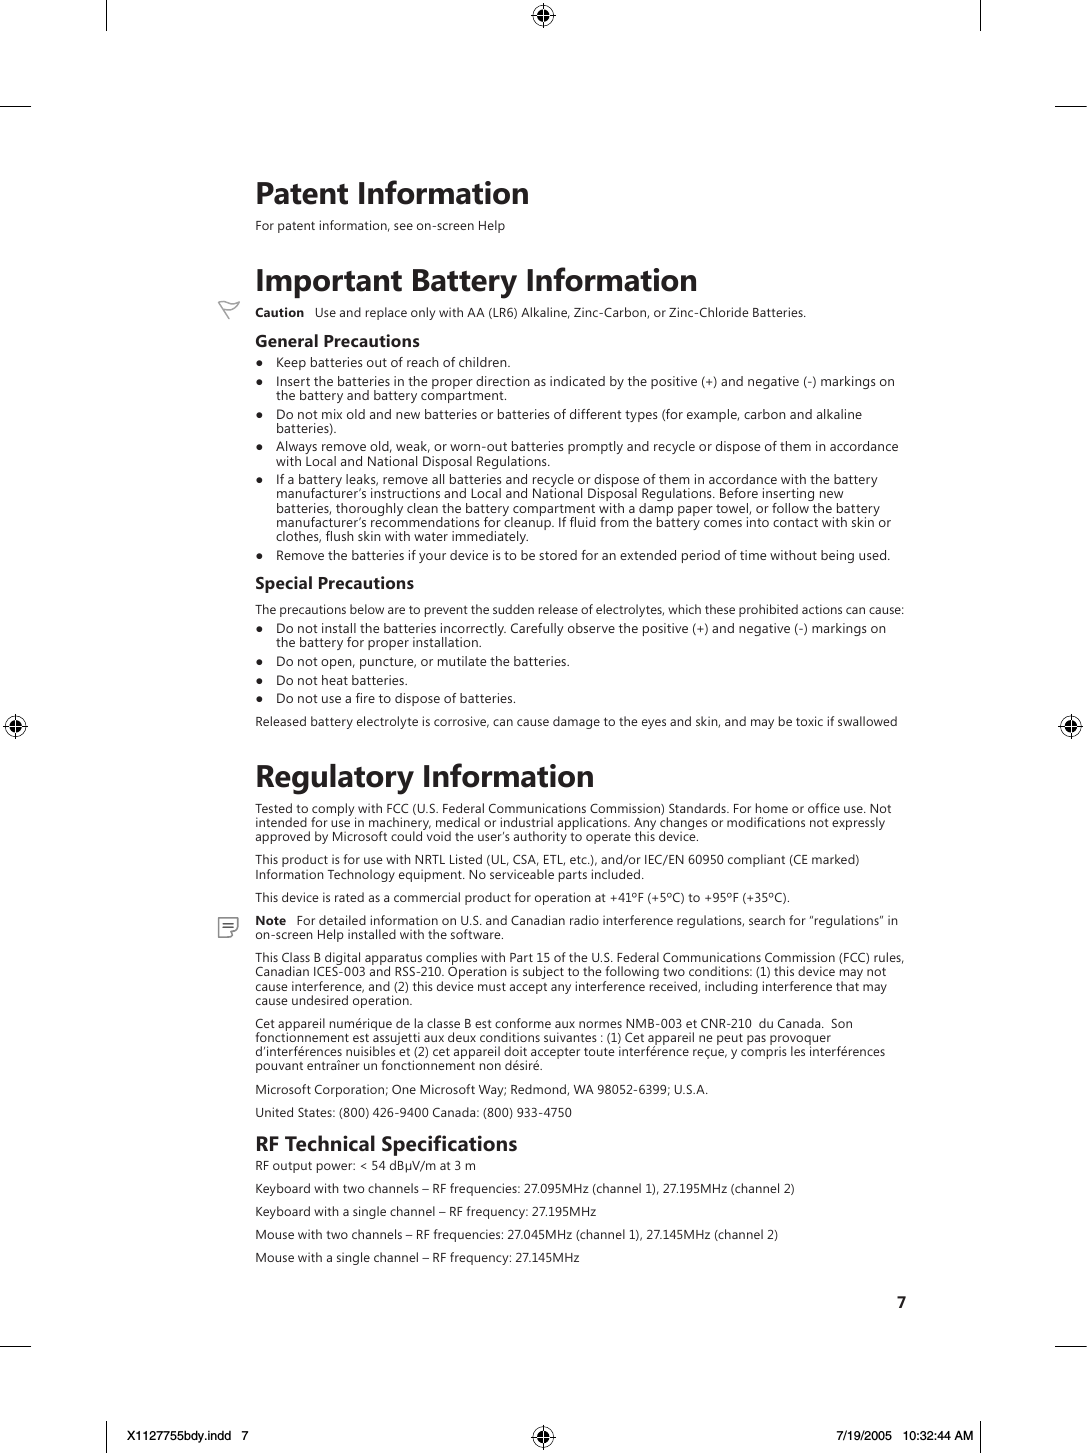 7    Patent InformationFor patent information, see on-screen Help    Important Battery Information  Caution   Use and replace only with AA (LR6) Alkaline, Zinc-Carbon, or Zinc-Chloride Batteries.General Precautions●  Keep batteries out of reach of children.●  Insert the batteries in the proper direction as indicated by the positive (+) and negative (-) markings on the battery and battery compartment.●  Do not mix old and new batteries or batteries of different types (for example, carbon and alkaline batteries).●  Always remove old, weak, or worn-out batteries promptly and recycle or dispose of them in accordance with Local and National Disposal Regulations.●  If a battery leaks, remove all batteries and recycle or dispose of them in accordance with the battery manufacturer’s instructions and Local and National Disposal Regulations. Before inserting new batteries, thoroughly clean the battery compartment with a damp paper towel, or follow the battery manufacturer’s recommendations for cleanup. If ﬂuid from the battery comes into contact with skin or clothes, ﬂush skin with water immediately.●  Remove the batteries if your device is to be stored for an extended period of time without being used.Special PrecautionsThe precautions below are to prevent the sudden release of electrolytes, which these prohibited actions can cause:●  Do not install the batteries incorrectly. Carefully observe the positive (+) and negative (-) markings on the battery for proper installation.●  Do not open, puncture, or mutilate the batteries.●  Do not heat batteries.●  Do not use a ﬁre to dispose of batteries.Released battery electrolyte is corrosive, can cause damage to the eyes and skin, and may be toxic if swallowed    Regulatory InformationTested to comply with FCC (U.S. Federal Communications Commission) Standards. For home or ofﬁce use. Not intended for use in machinery, medical or industrial applications. Any changes or modiﬁcations not expressly approved by Microsoft could void the user’s authority to operate this device.This product is for use with NRTL Listed (UL, CSA, ETL, etc.), and/or IEC/EN 60950 compliant (CE marked) Information Technology equipment. No serviceable parts included.This device is rated as a commercial product for operation at +41ºF (+5ºC) to +95ºF (+35ºC).  Note   For detailed information on U.S. and Canadian radio interference regulations, search for “regulations” in on-screen Help installed with the software. This Class B digital apparatus complies with Part 15 of the U.S. Federal Communications Commission (FCC) rules, Canadian ICES-003 and RSS-210. Operation is subject to the following two conditions: (1) this device may not cause interference, and (2) this device must accept any interference received, including interference that may cause undesired operation.Cet appareil numérique de la classe B est conforme aux normes NMB-003 et CNR-210  du Canada.  Son fonctionnement est assujetti aux deux conditions suivantes : (1) Cet appareil ne peut pas provoquer d’interférences nuisibles et (2) cet appareil doit accepter toute interférence reçue, y compris les interférences pouvant entraîner un fonctionnement non désiré.Microsoft Corporation; One Microsoft Way; Redmond, WA 98052-6399; U.S.A.United States: (800) 426-9400 Canada: (800) 933-4750RF Technical SpecificationsRF output power: &lt; 54 dBµV/m at 3 mKeyboard with two channels – RF frequencies: 27.095MHz (channel 1), 27.195MHz (channel 2)Keyboard with a single channel – RF frequency: 27.195MHzMouse with two channels – RF frequencies: 27.045MHz (channel 1), 27.145MHz (channel 2)Mouse with a single channel – RF frequency: 27.145MHzX1127755bdy.indd   7 7/19/2005   10:32:44 AM